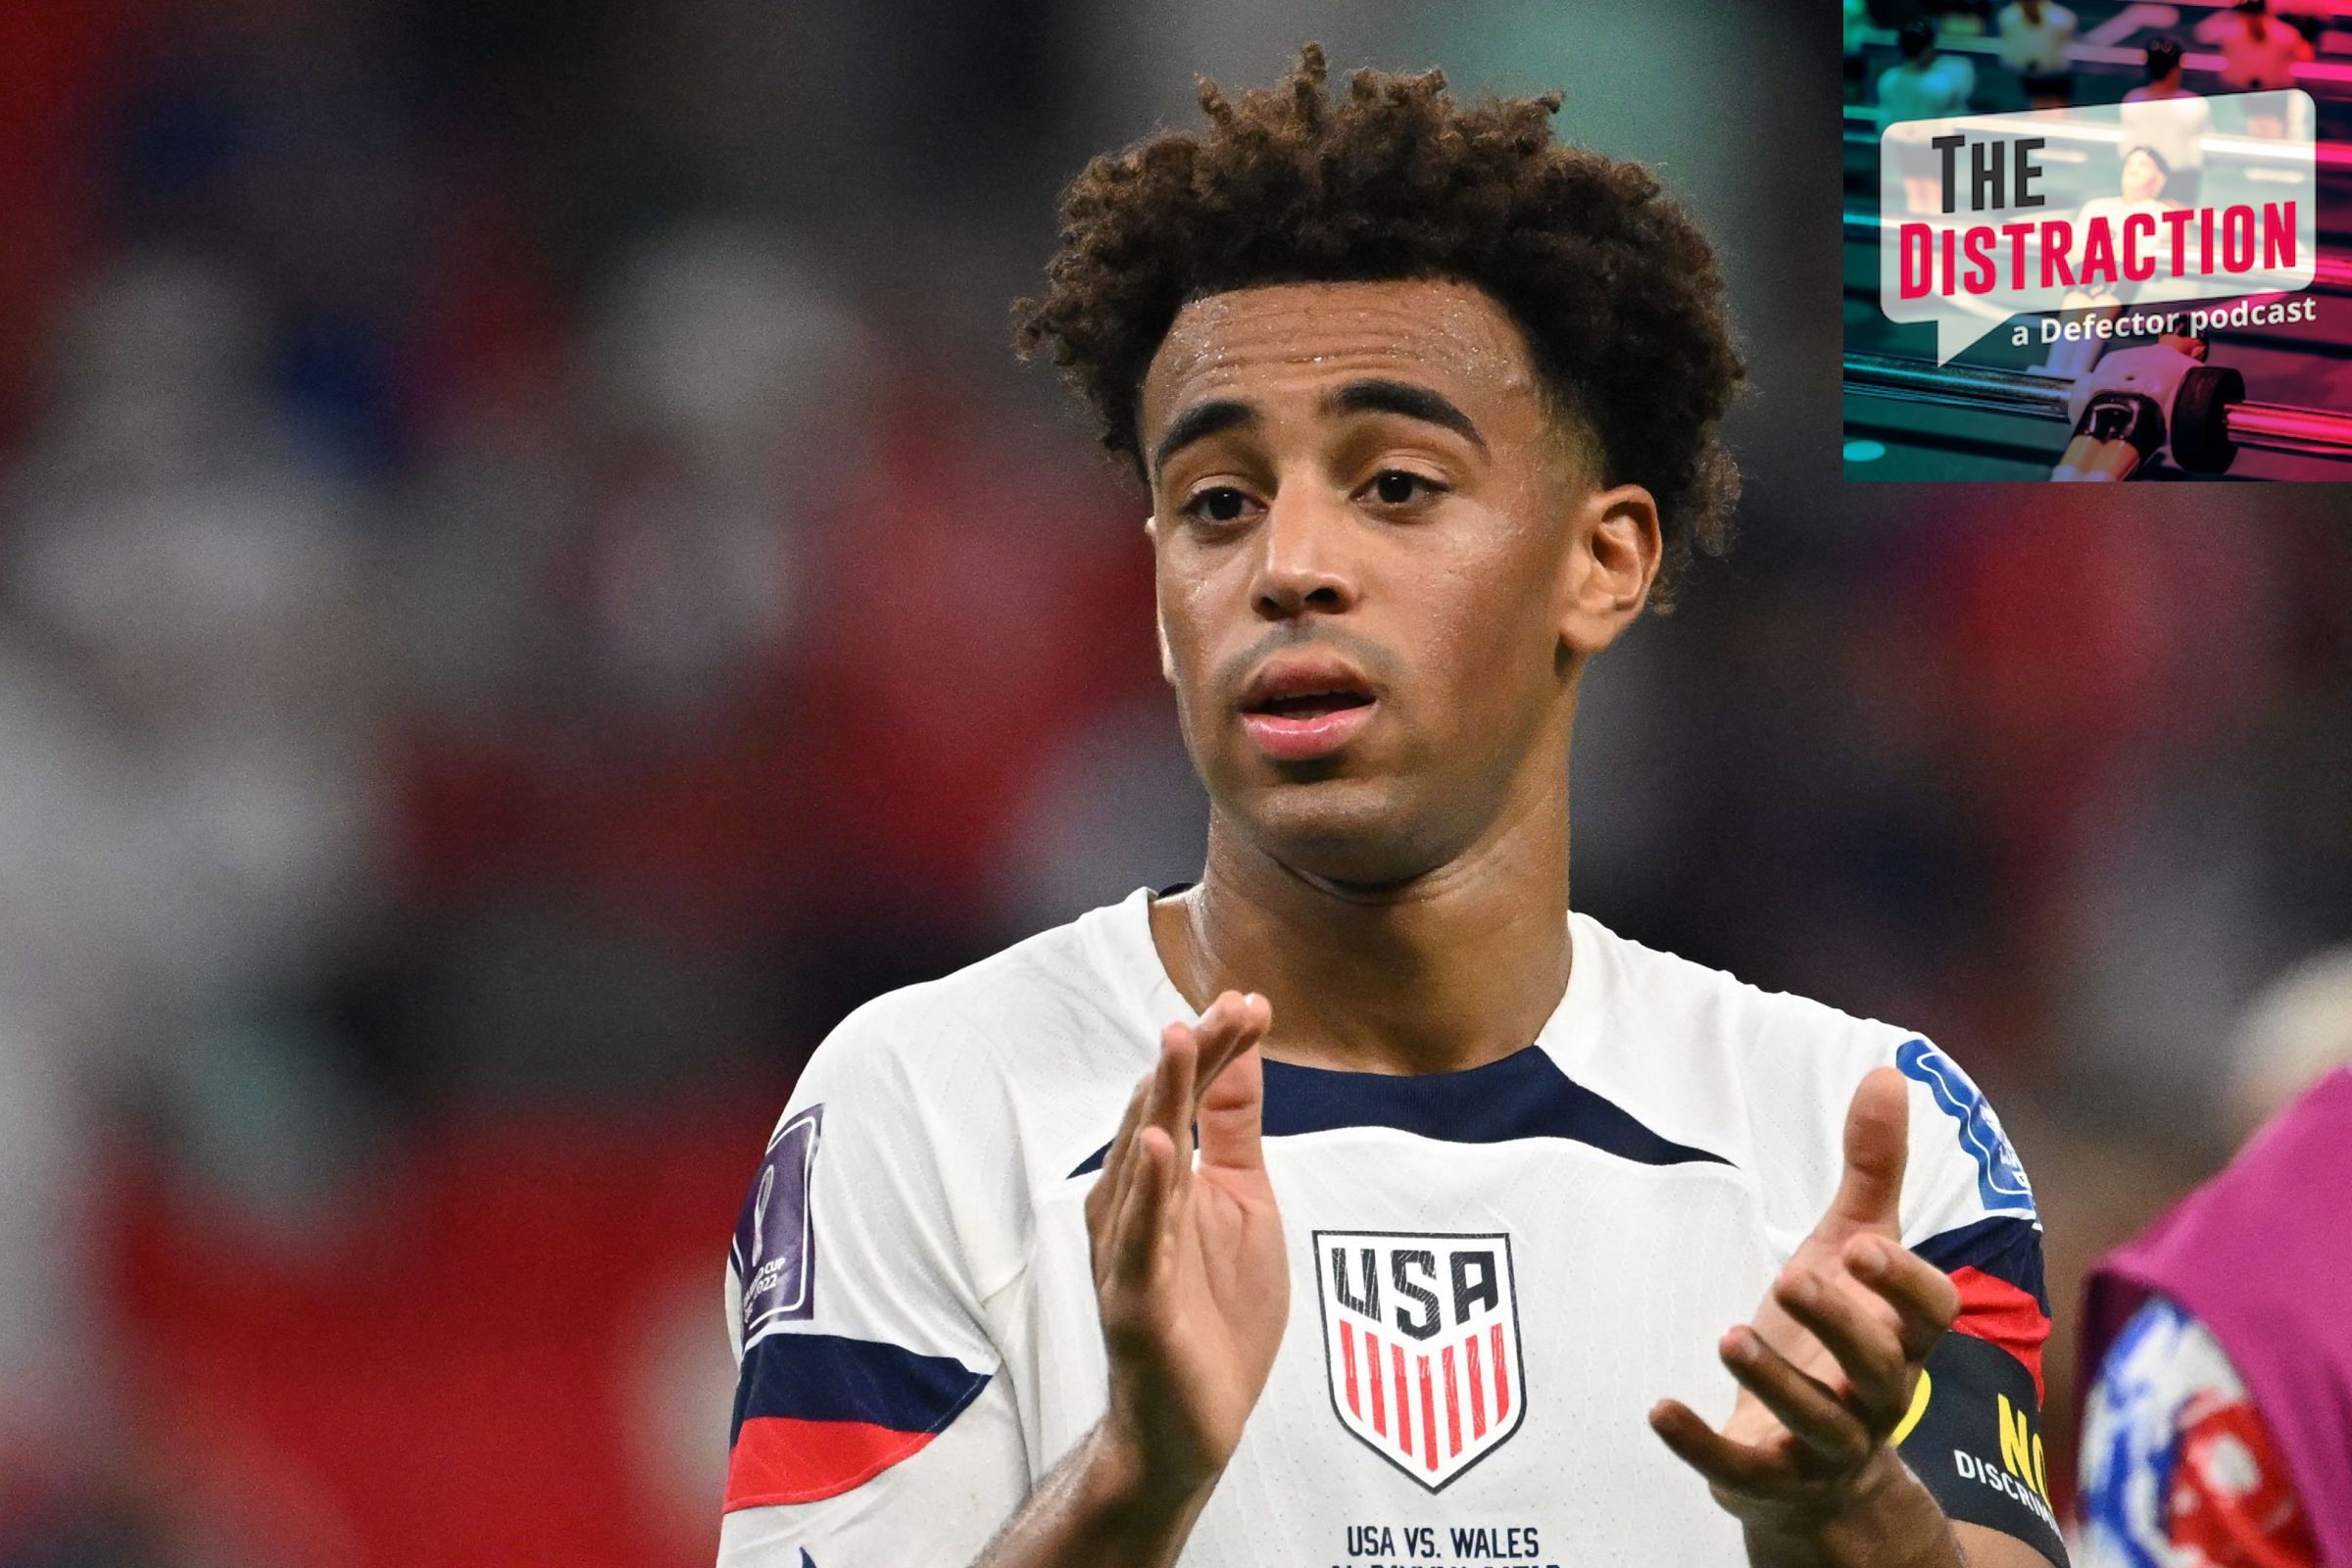 USMNT midfielder Tyler Adams applauds after the team's 1-1 tie against Wales in the 2022 World Cup. The Distraction logo is at upper right.